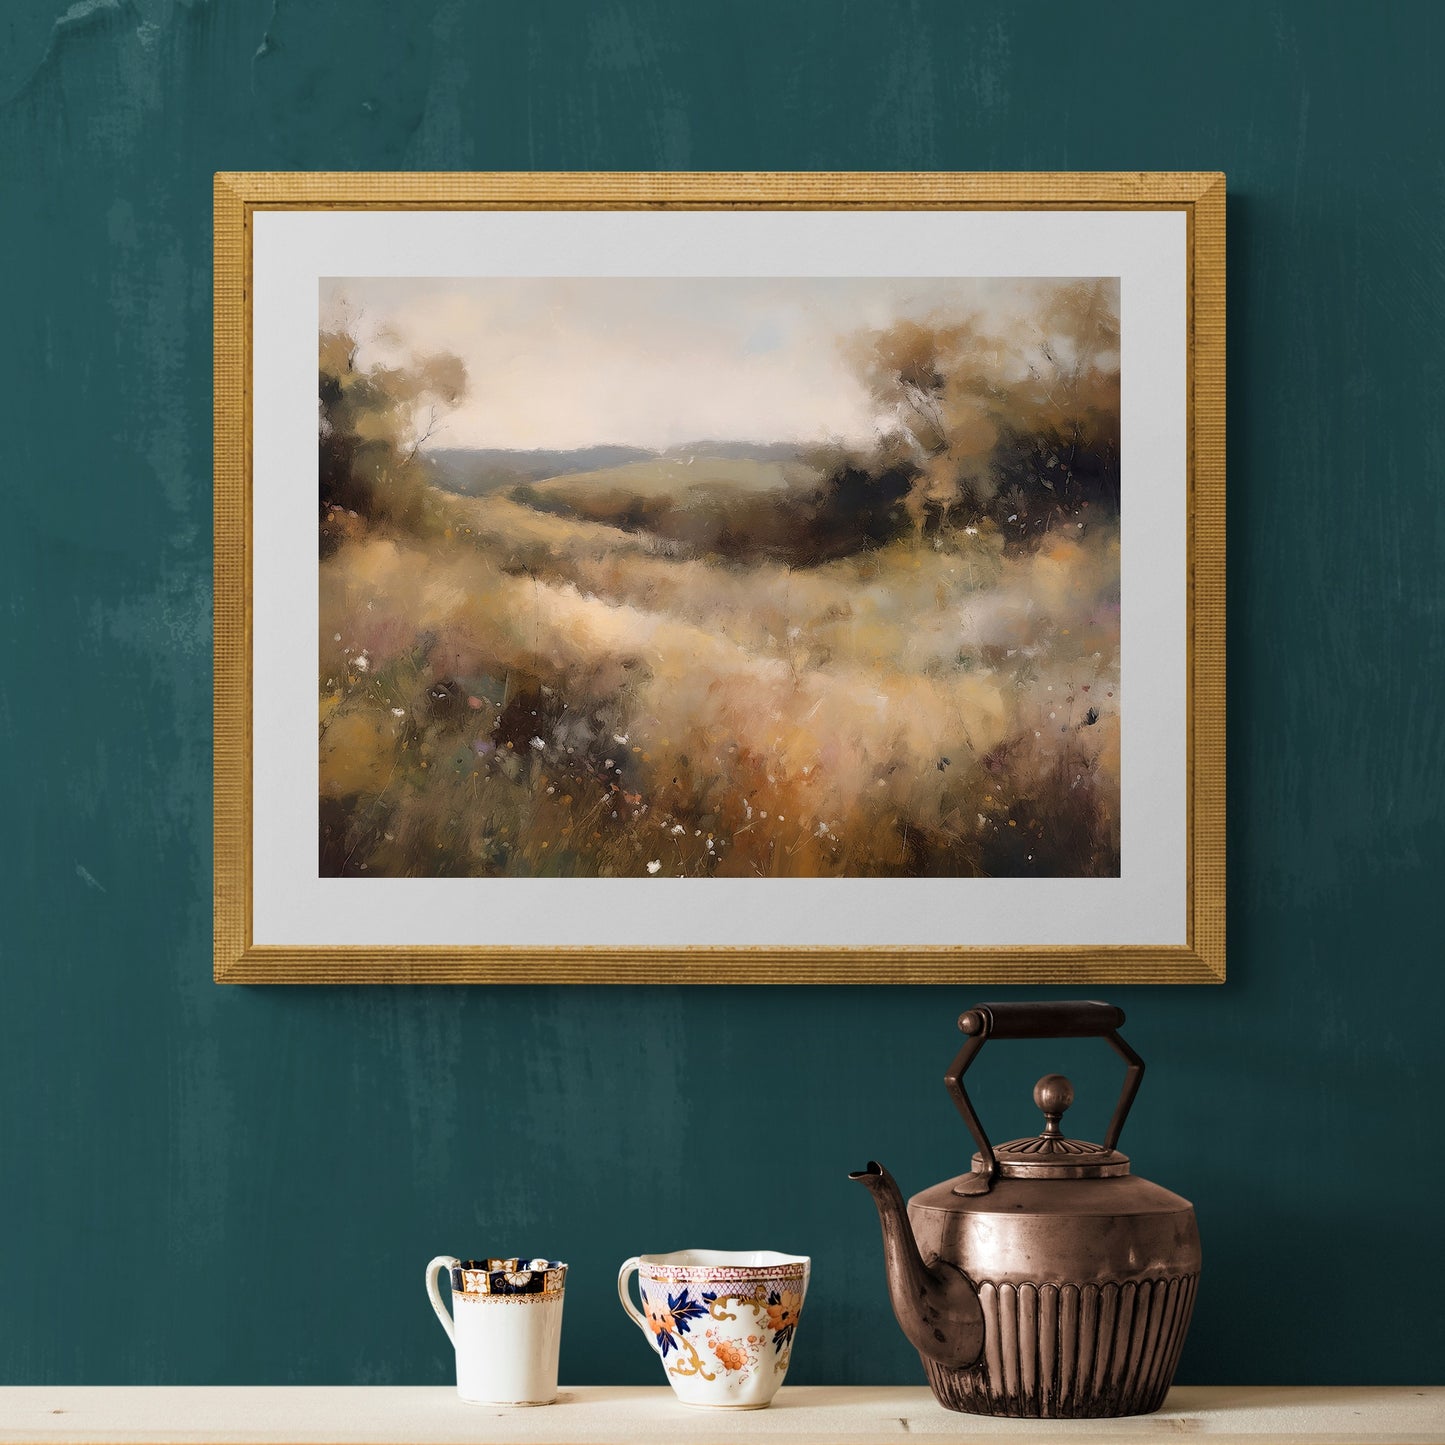 Vintage Wildflower Meadow Oil Painting Paper Poster Prints Wall Art Rural Countryside, Hazy Weather, Earth Tone Colors, Timeless Nature Home Decor